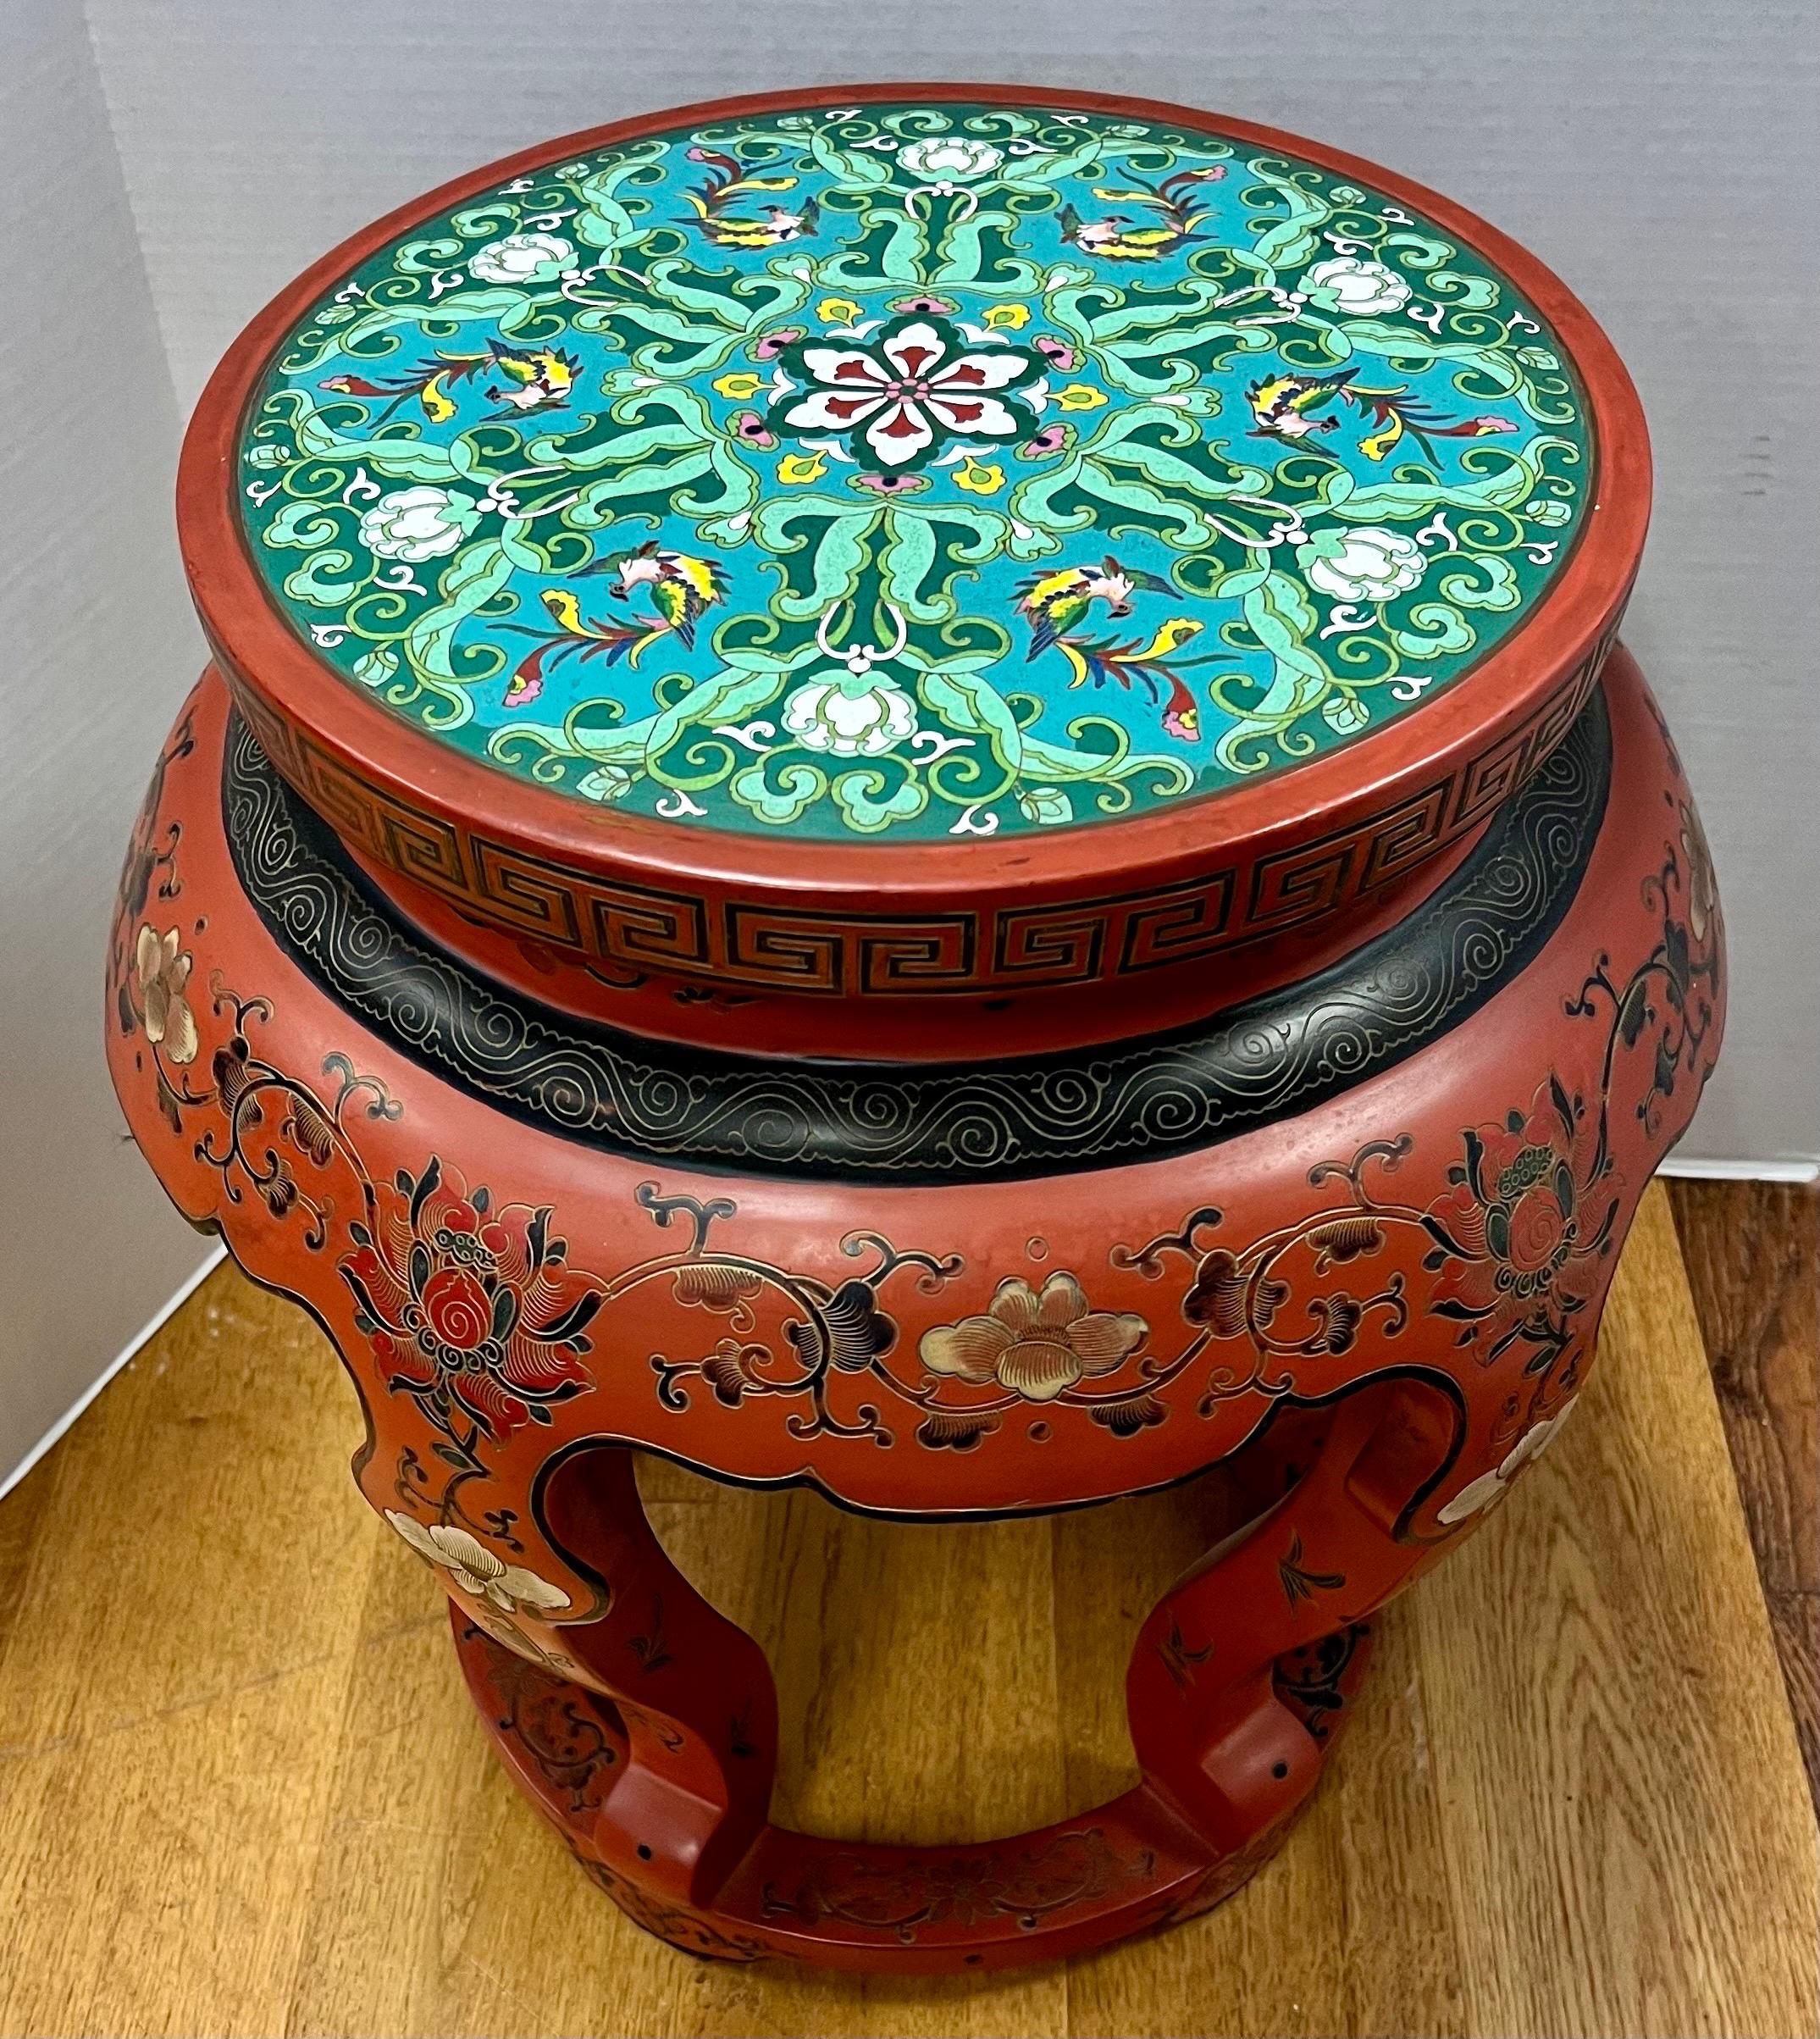 Beautiful Qing Dynasty Chinese red lacquer garden stool/pedestal that features a green cloissone seat with a colorful bird and floral motif. Base has hand carved handpainted pattern of flowers all around. Iconic and gorgeous. Why not own the best?.